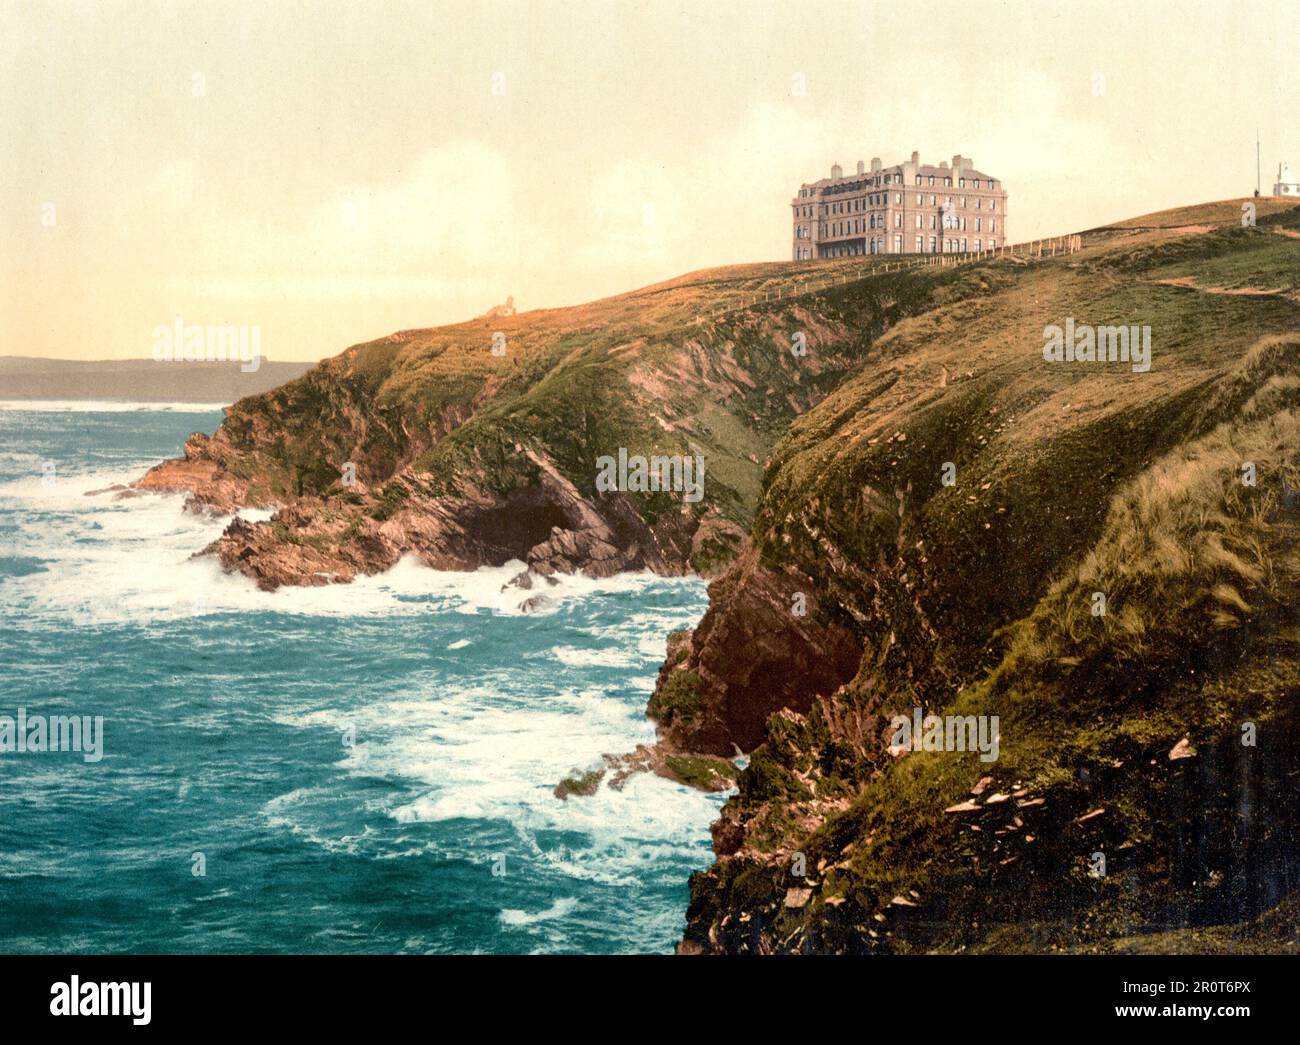 Newquay, Beacon Cove, Cornwall, Angleterre, vers 1900 Banque D'Images